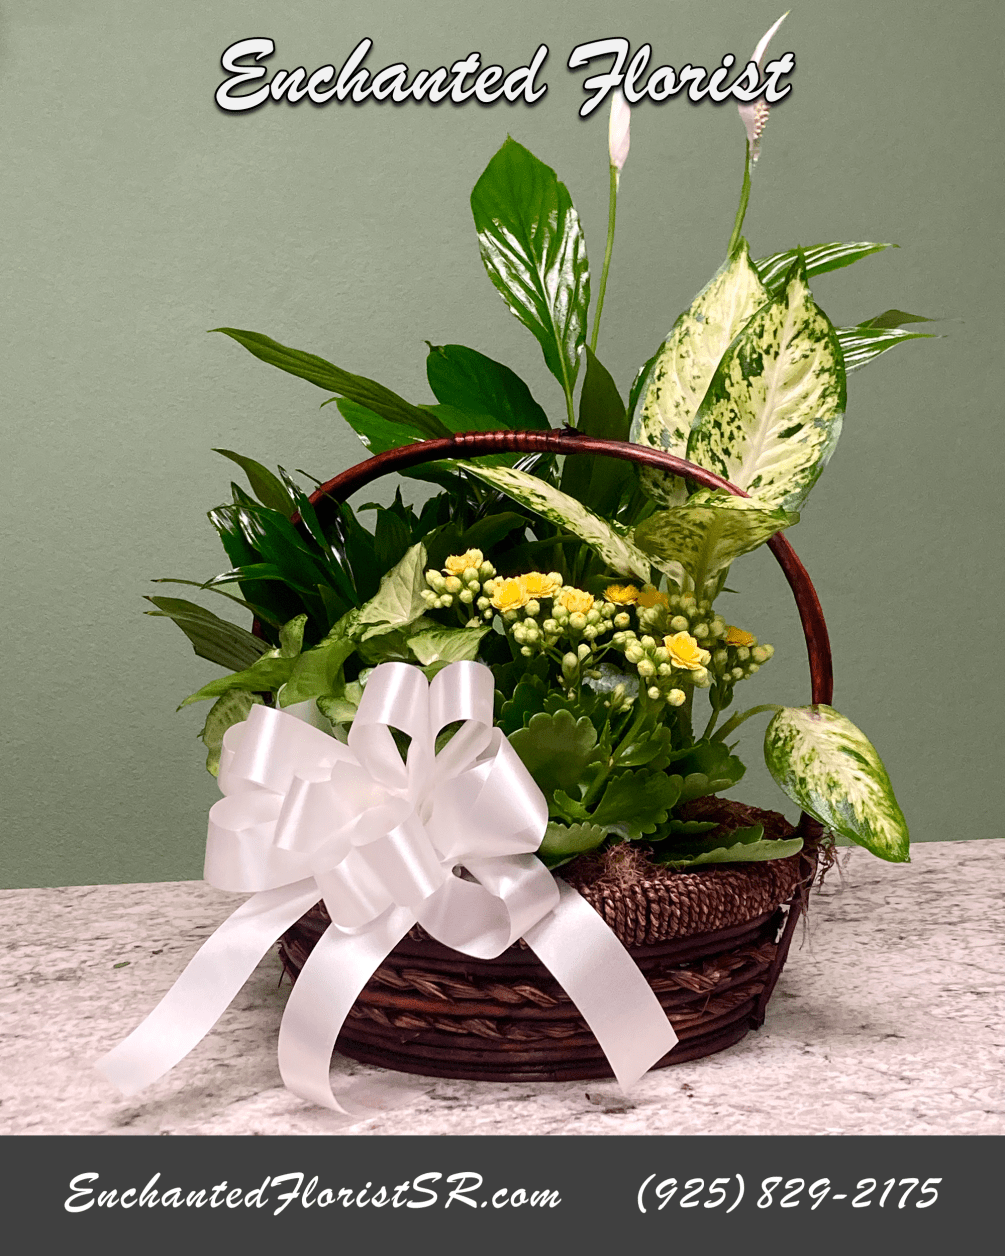 Peace Lily Garden Basket is a mixed plant garden featuring Spathiphyllum, also